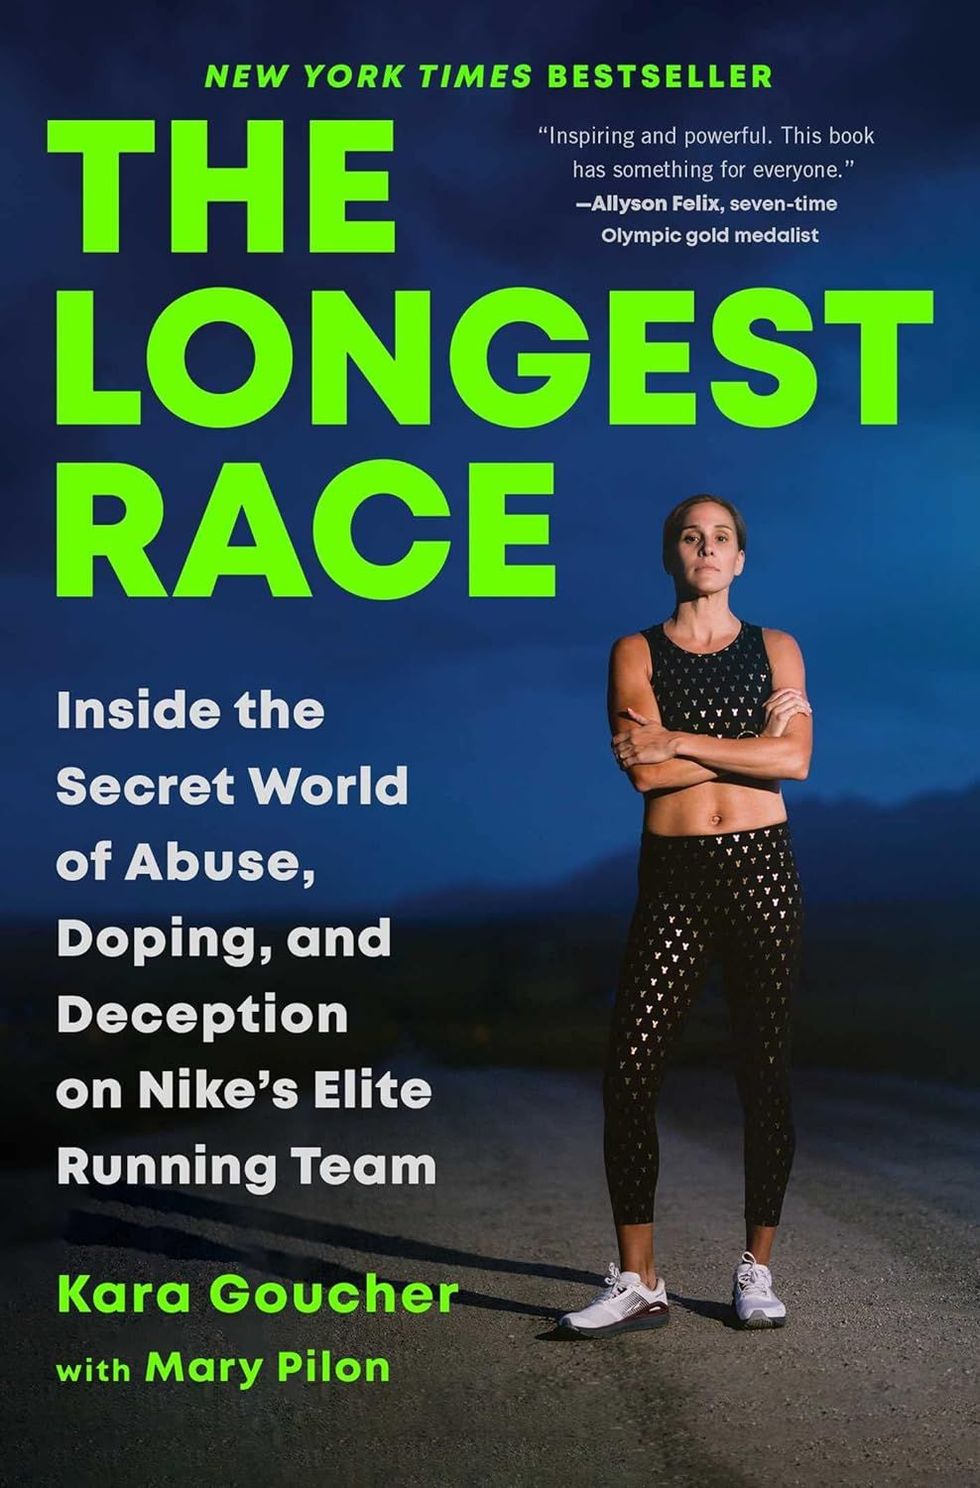 'The Longest Race: Inside the Secret World of Abuse, Doping, and Deception on Nike's Elite Running Team' Kara Goucher with Mary Pilon